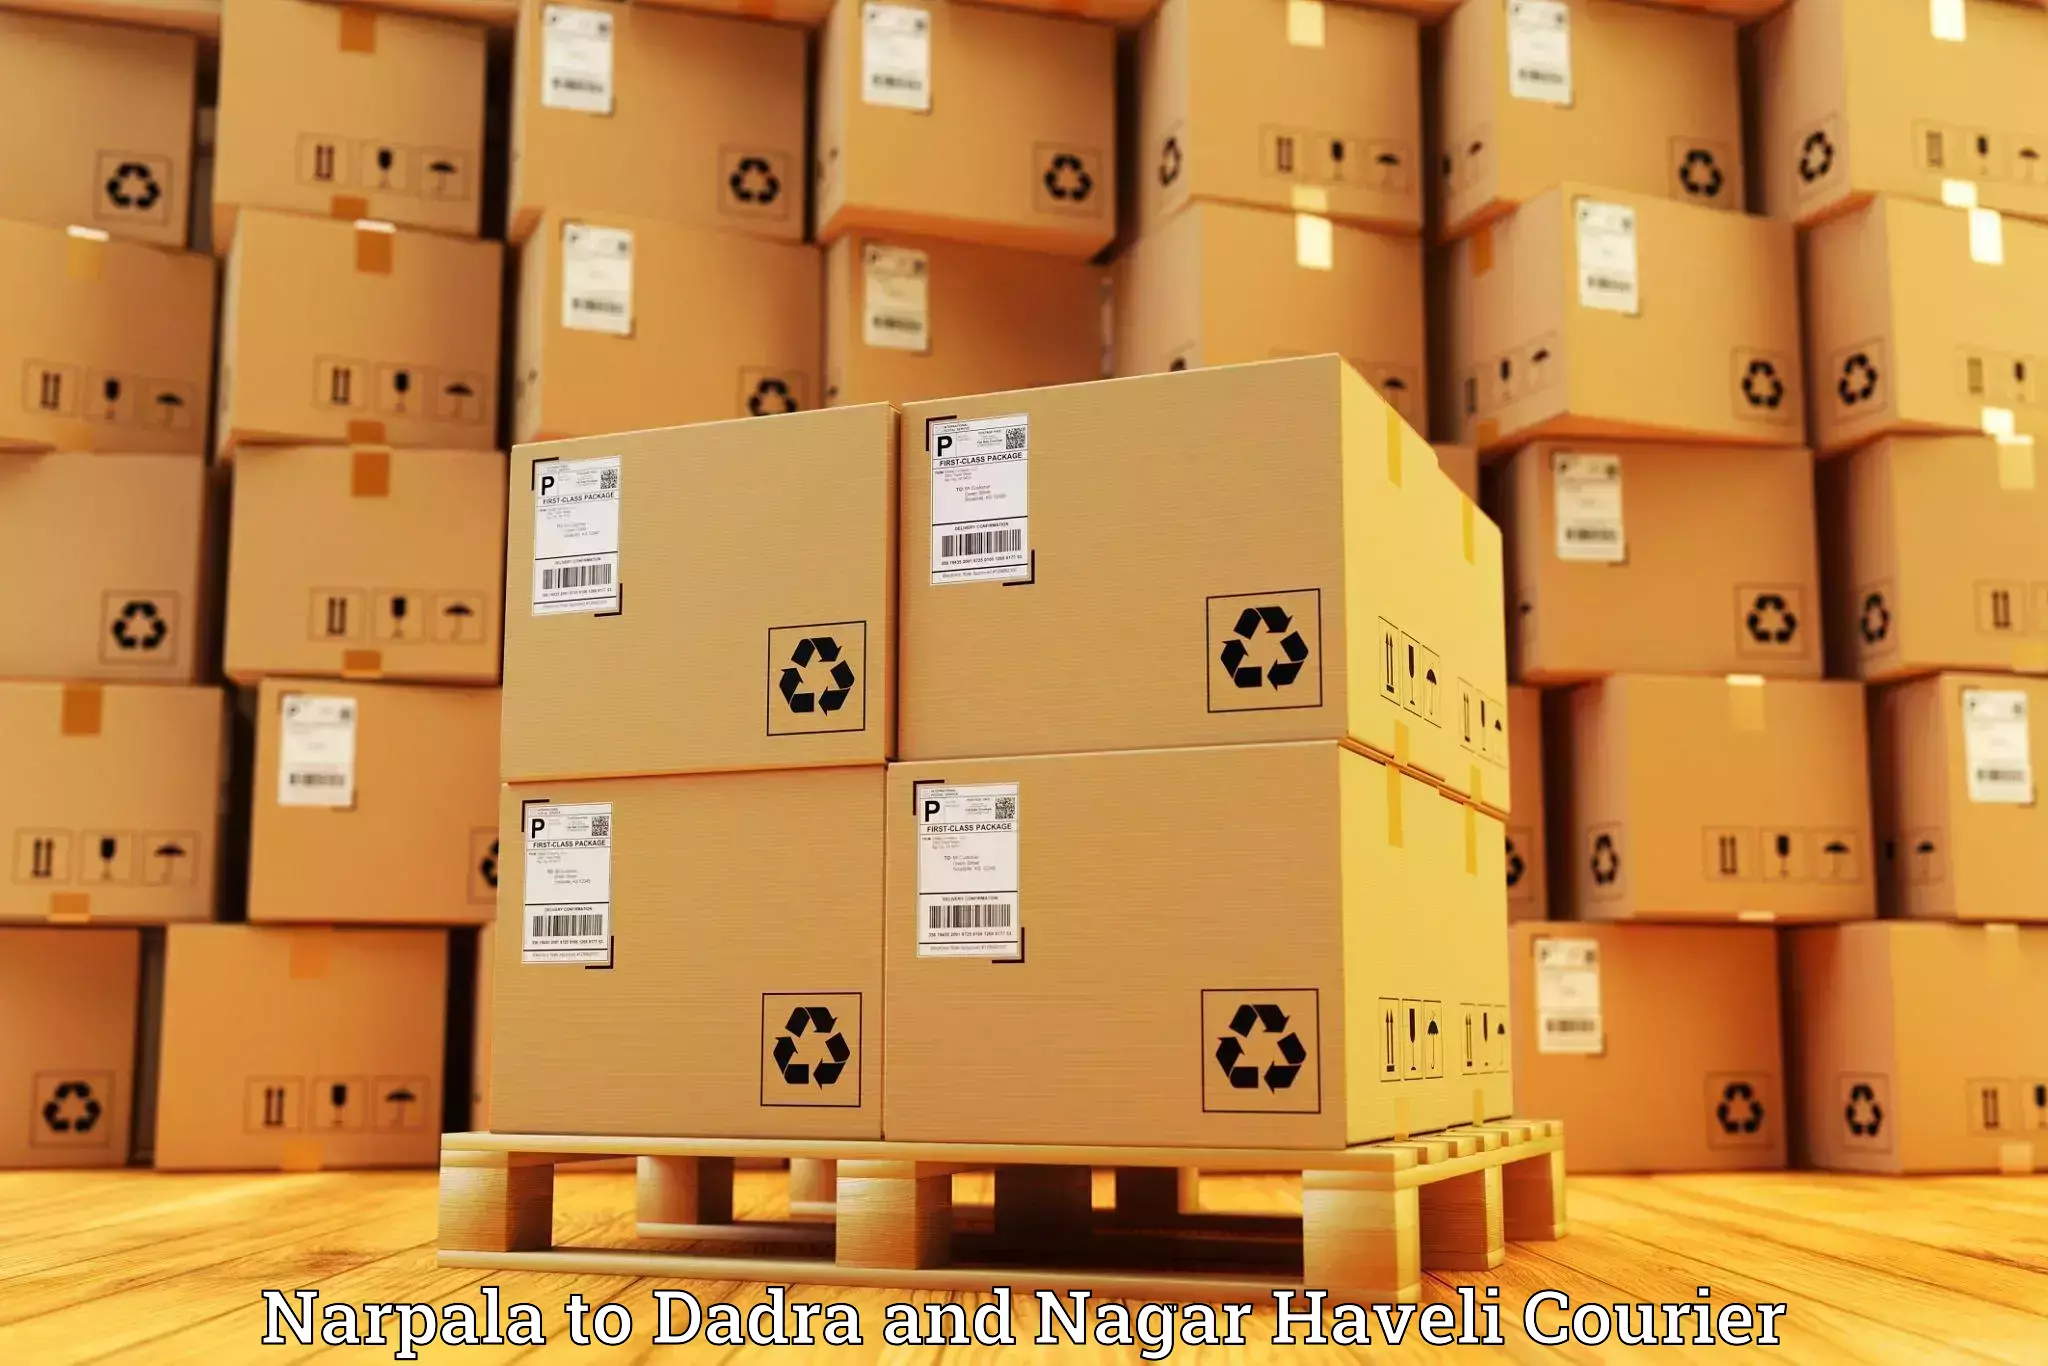 State-of-the-art courier technology Narpala to Dadra and Nagar Haveli